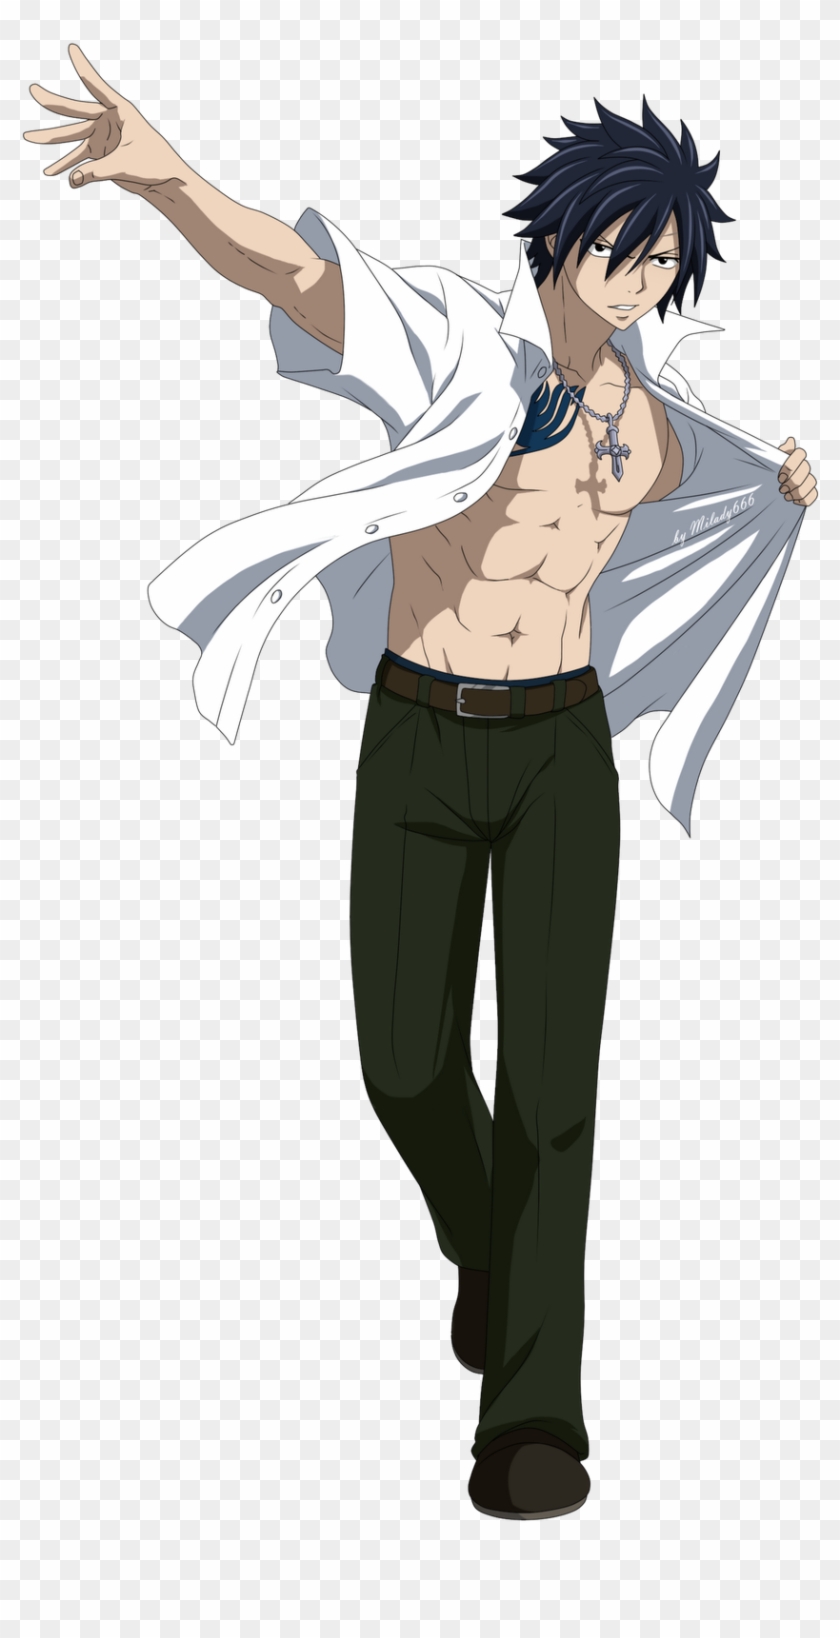 We Have Nothing To Fear Even If We Don't Have Any Magic - Fairy Tail Gray Shirtless Clipart #4348474